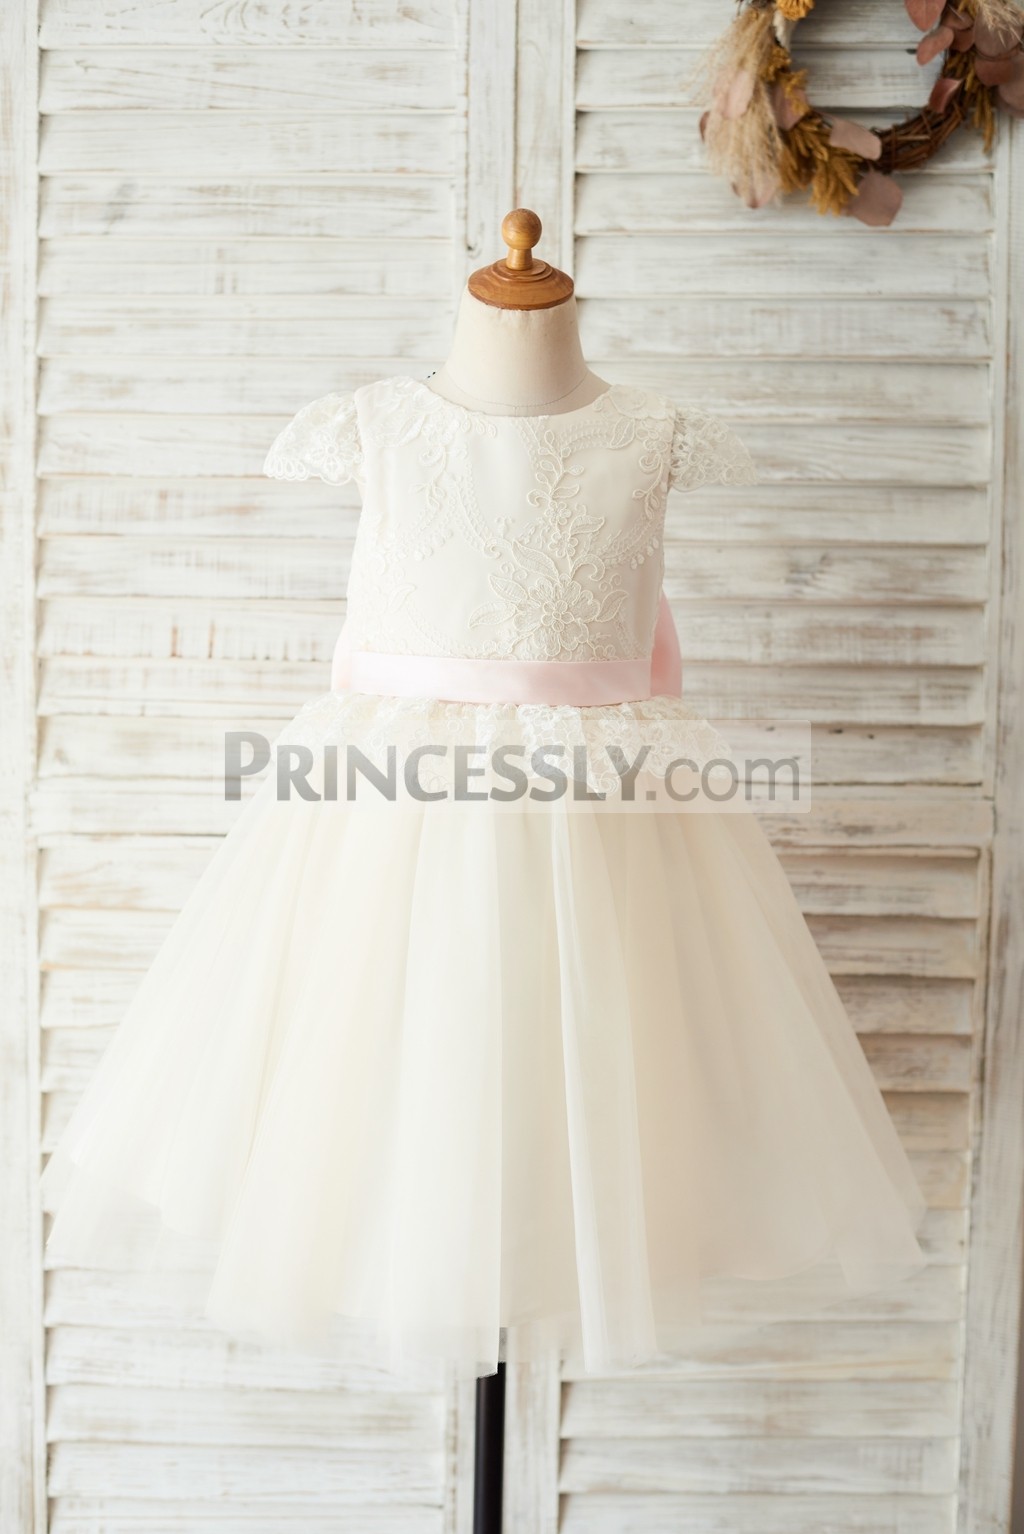 Princess ivory lace champagne tulle flower girl dress 